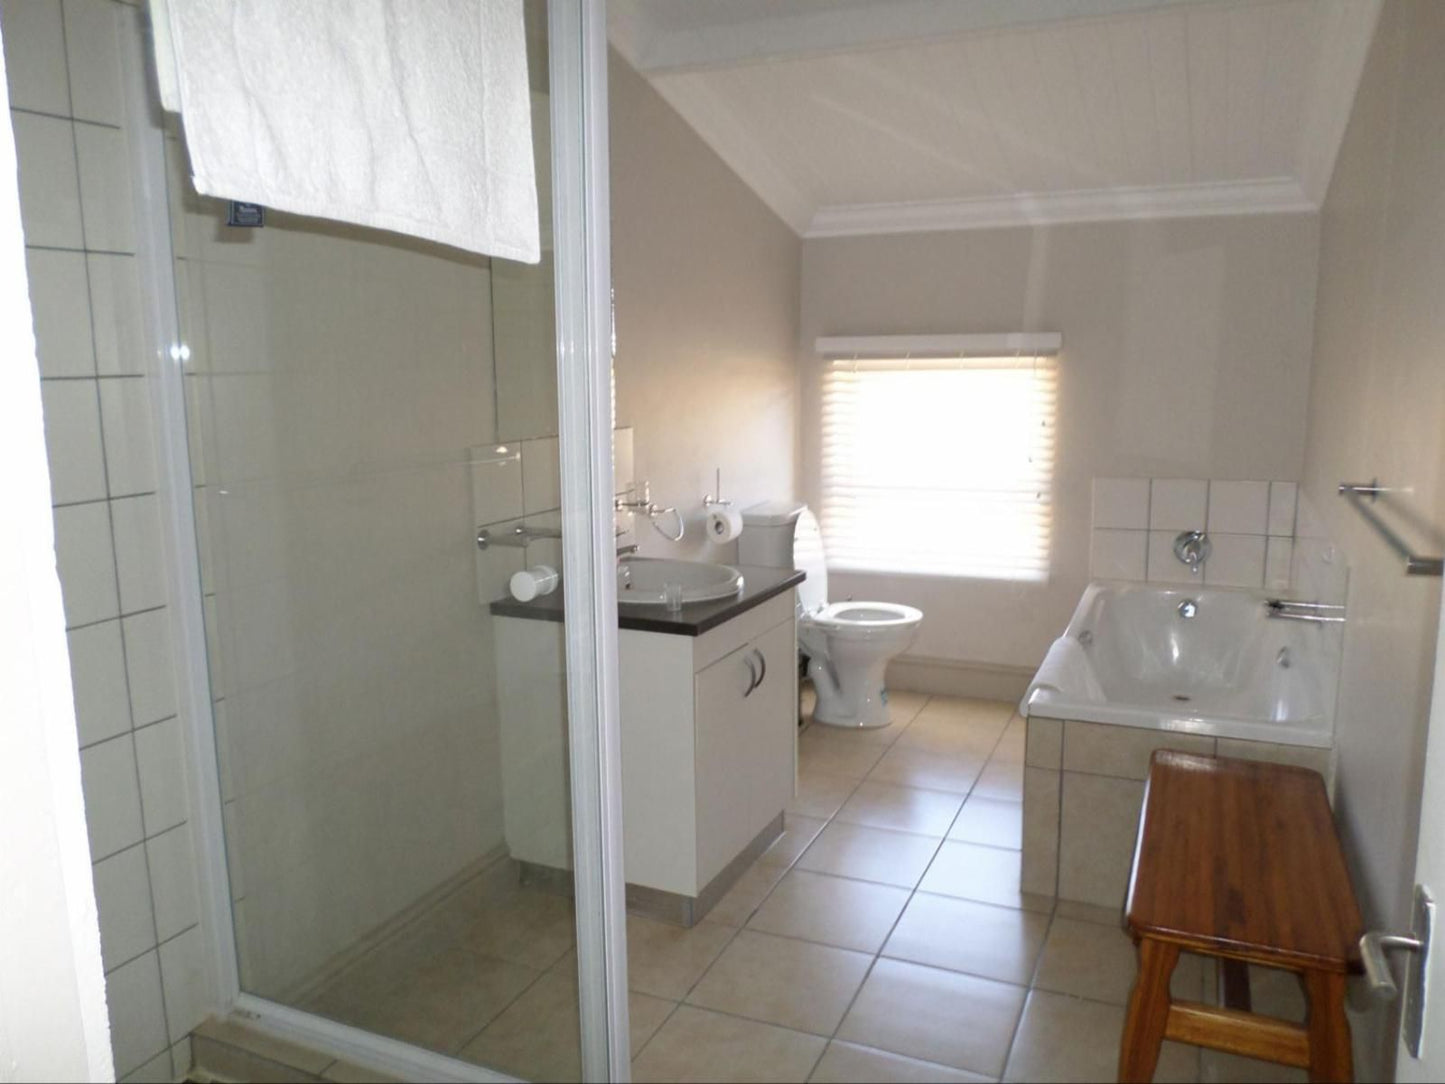 Clanwilliam Accommodation Clanwilliam Western Cape South Africa Unsaturated, Bathroom